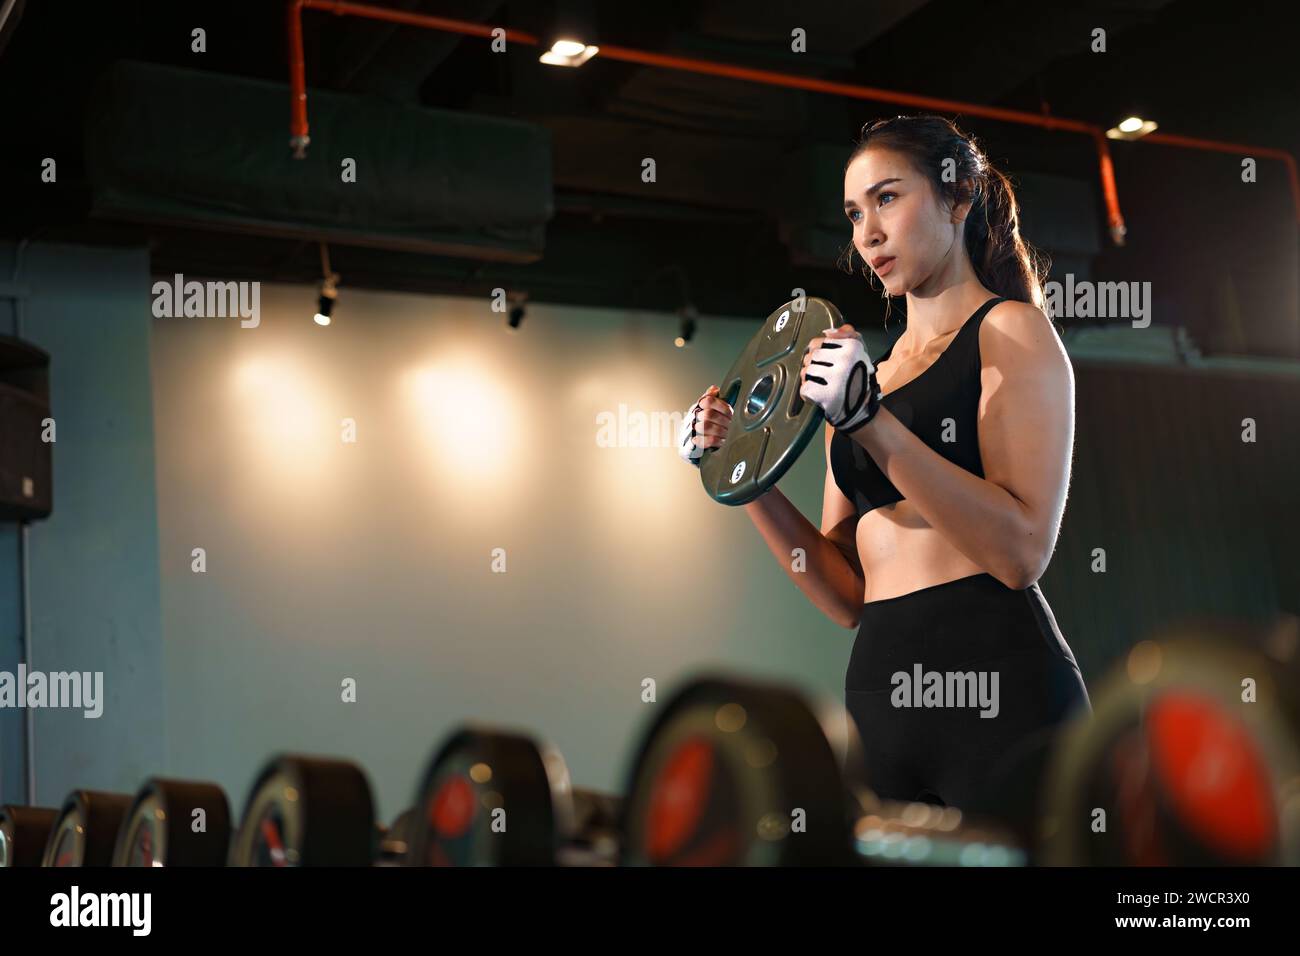 Sporty woman doing exercises with heavy weights plates in gym. Stock Photo